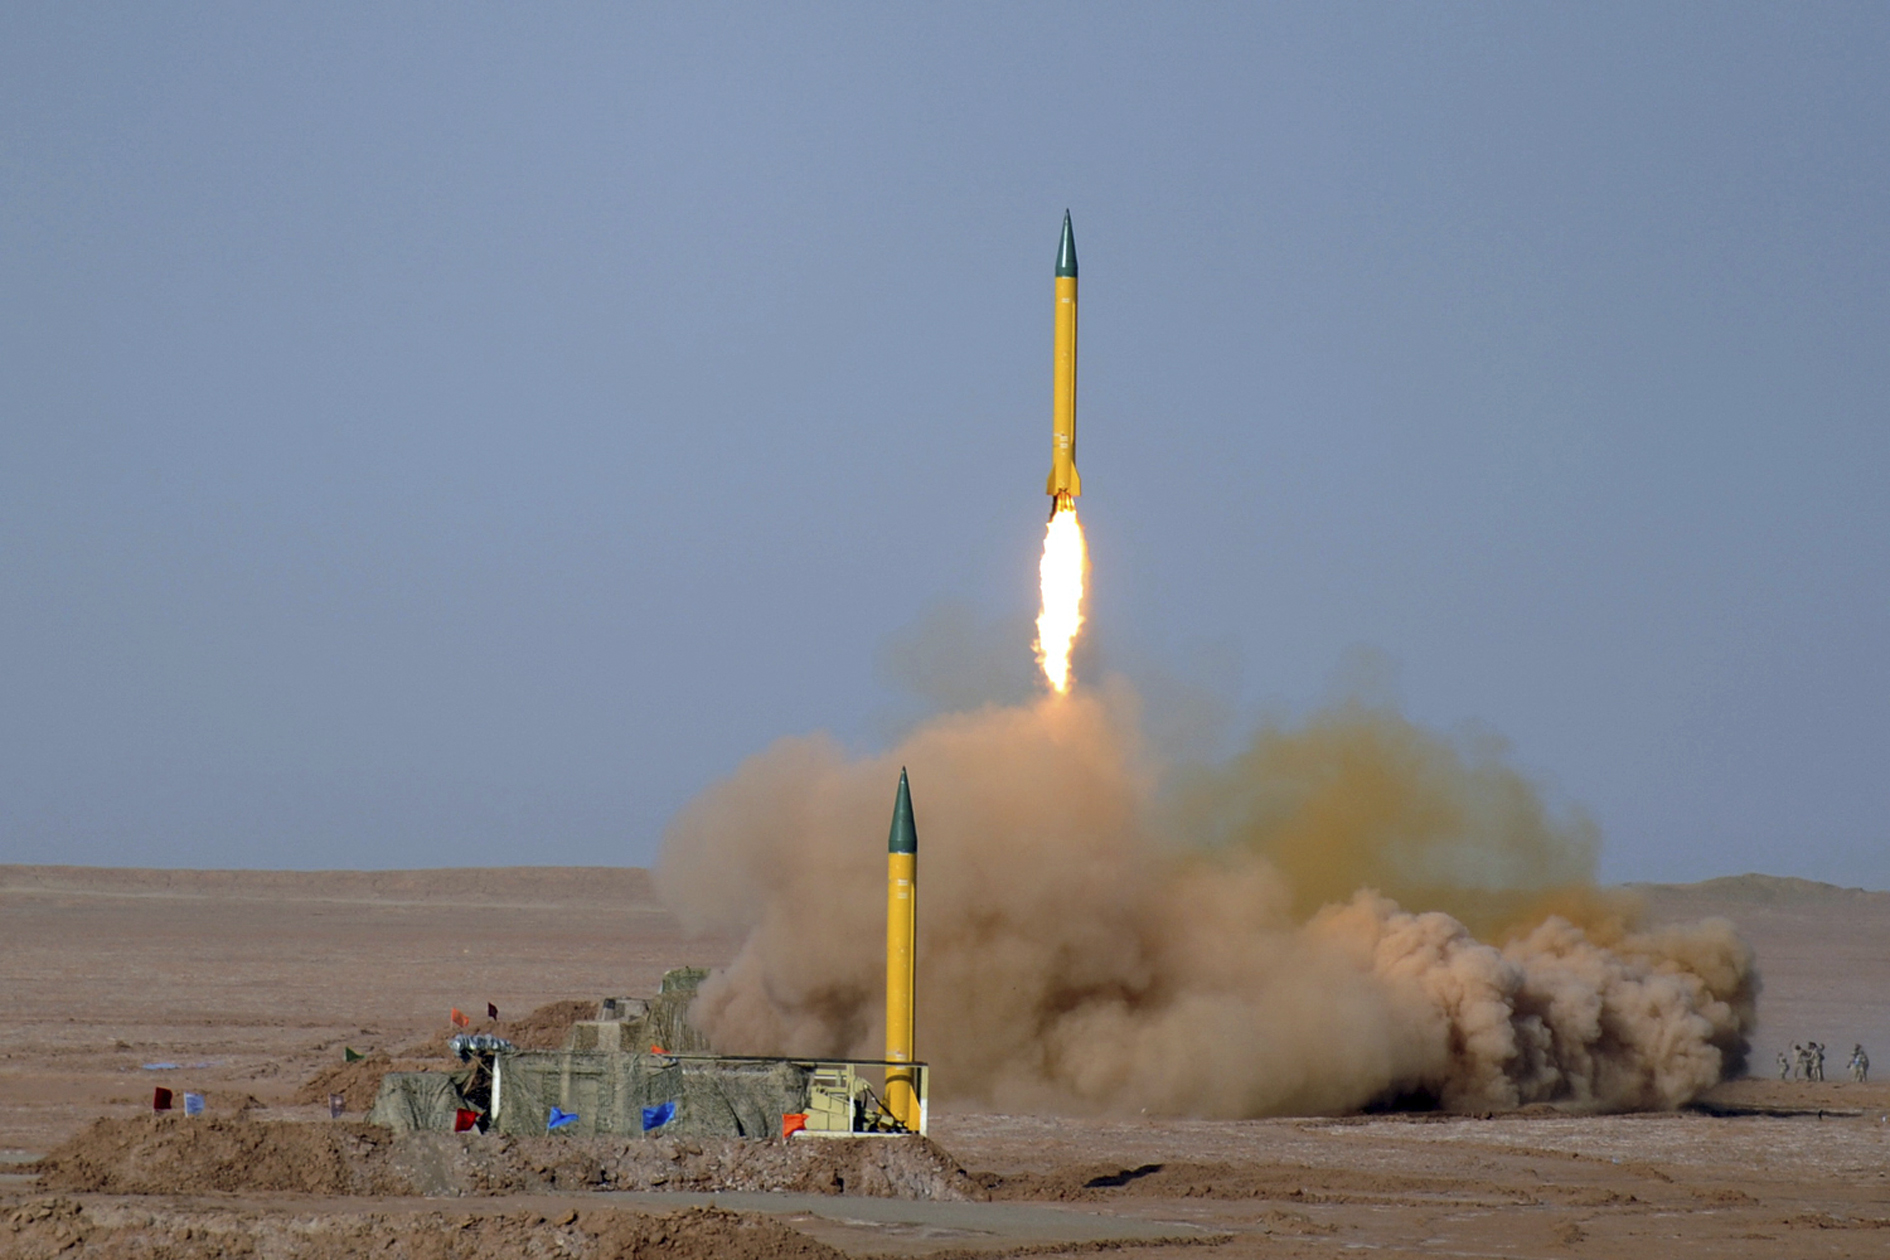 epa03293474 The upgrade version of medium range missile Shahab-1, is launched during the second day of military exercises, codenamed Great Prophet, by Iran's elite Revolutionary Guards at the Lut desert in southeastern Iran, 03 July 2012. Report said that on the second day of a military manoeuvre in the Lut desert in southeastern Iran, several missiles were successfully tested, without giving further details.  The IRGC plans to test all of its short-, medium- and long-range missiles in the ongoing manoeuvre which took place one day after the European Union's latest oil sanctions against Tehran went into effect.  EPA/Mojtaba Heydari